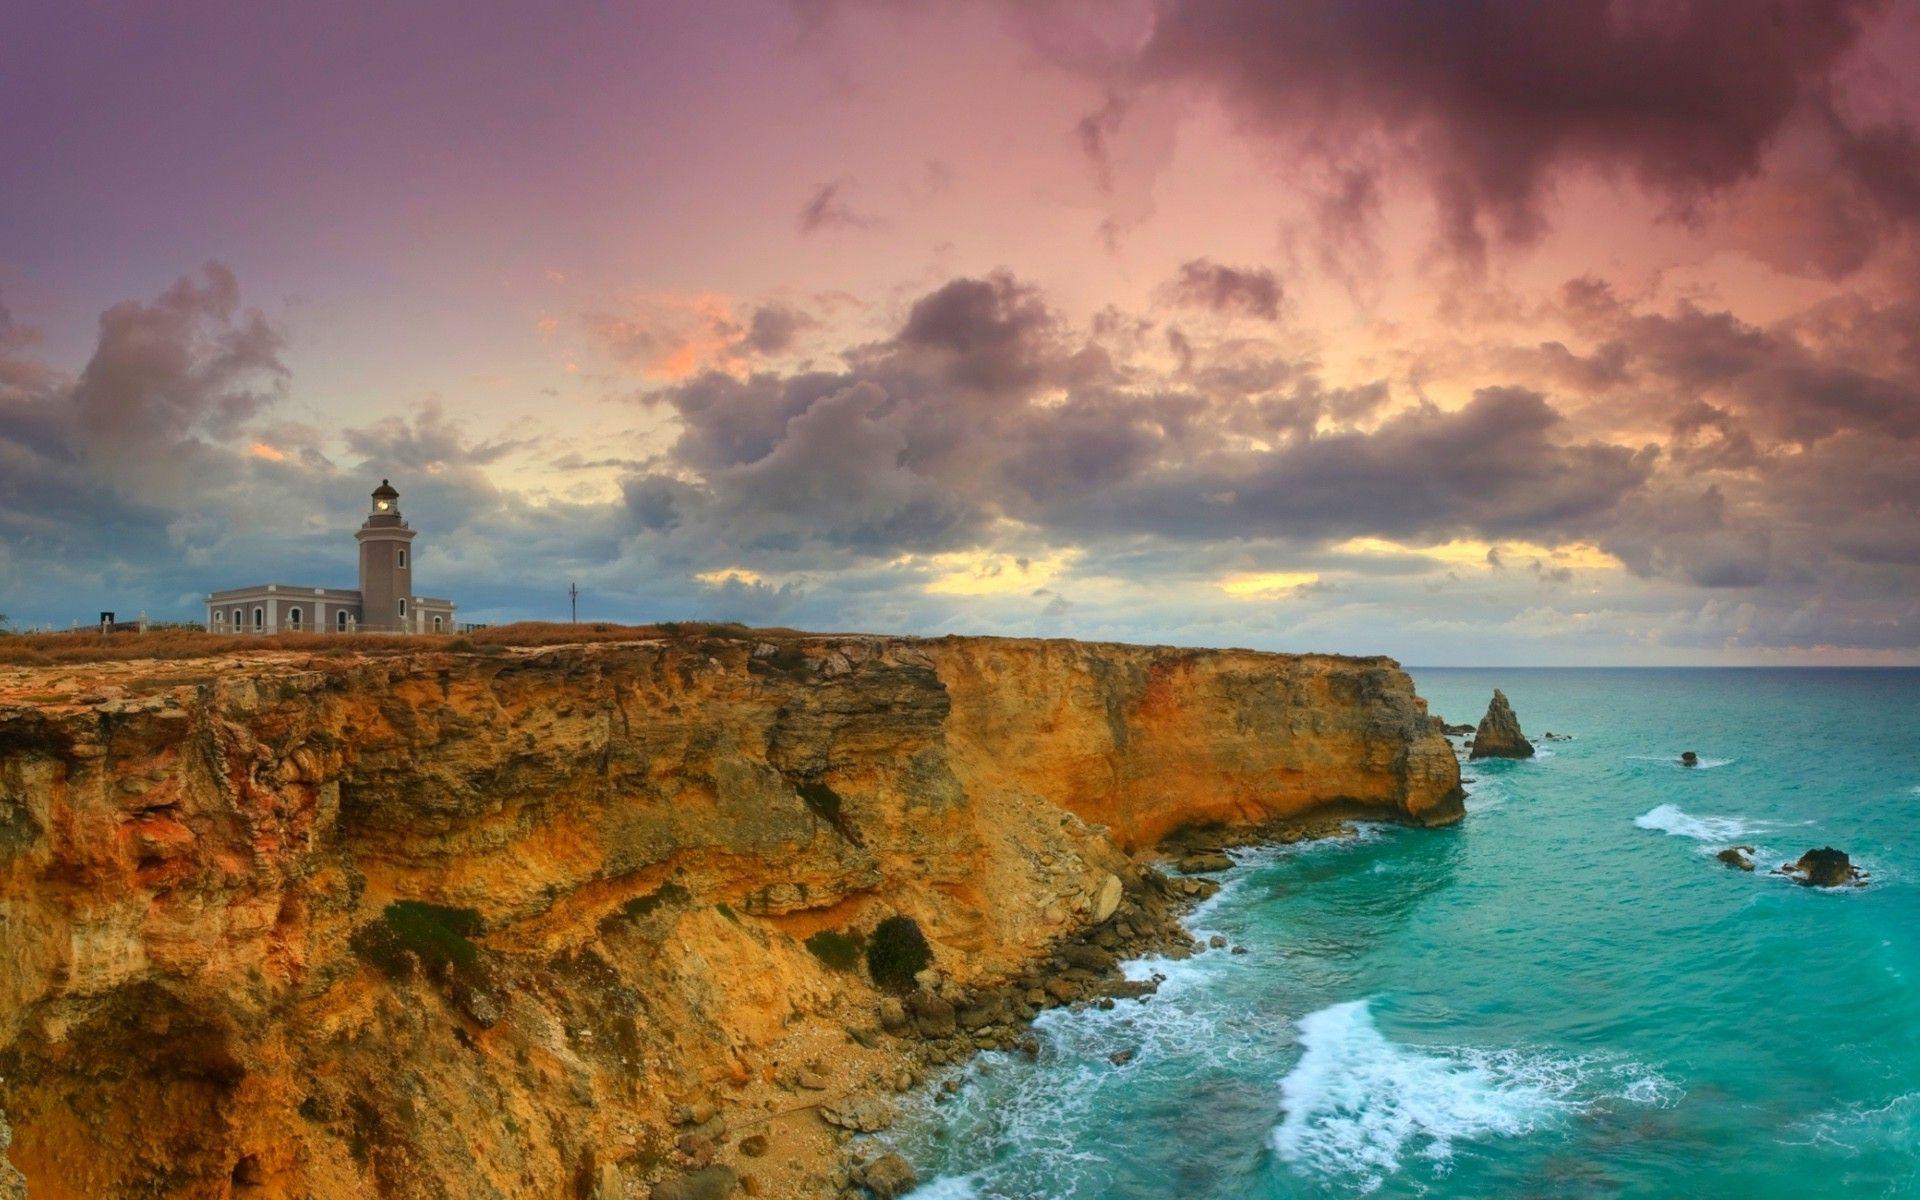 lighthouse, Cliff, Sea, Rock, Clouds, Sunset, Puerto Rico, Island